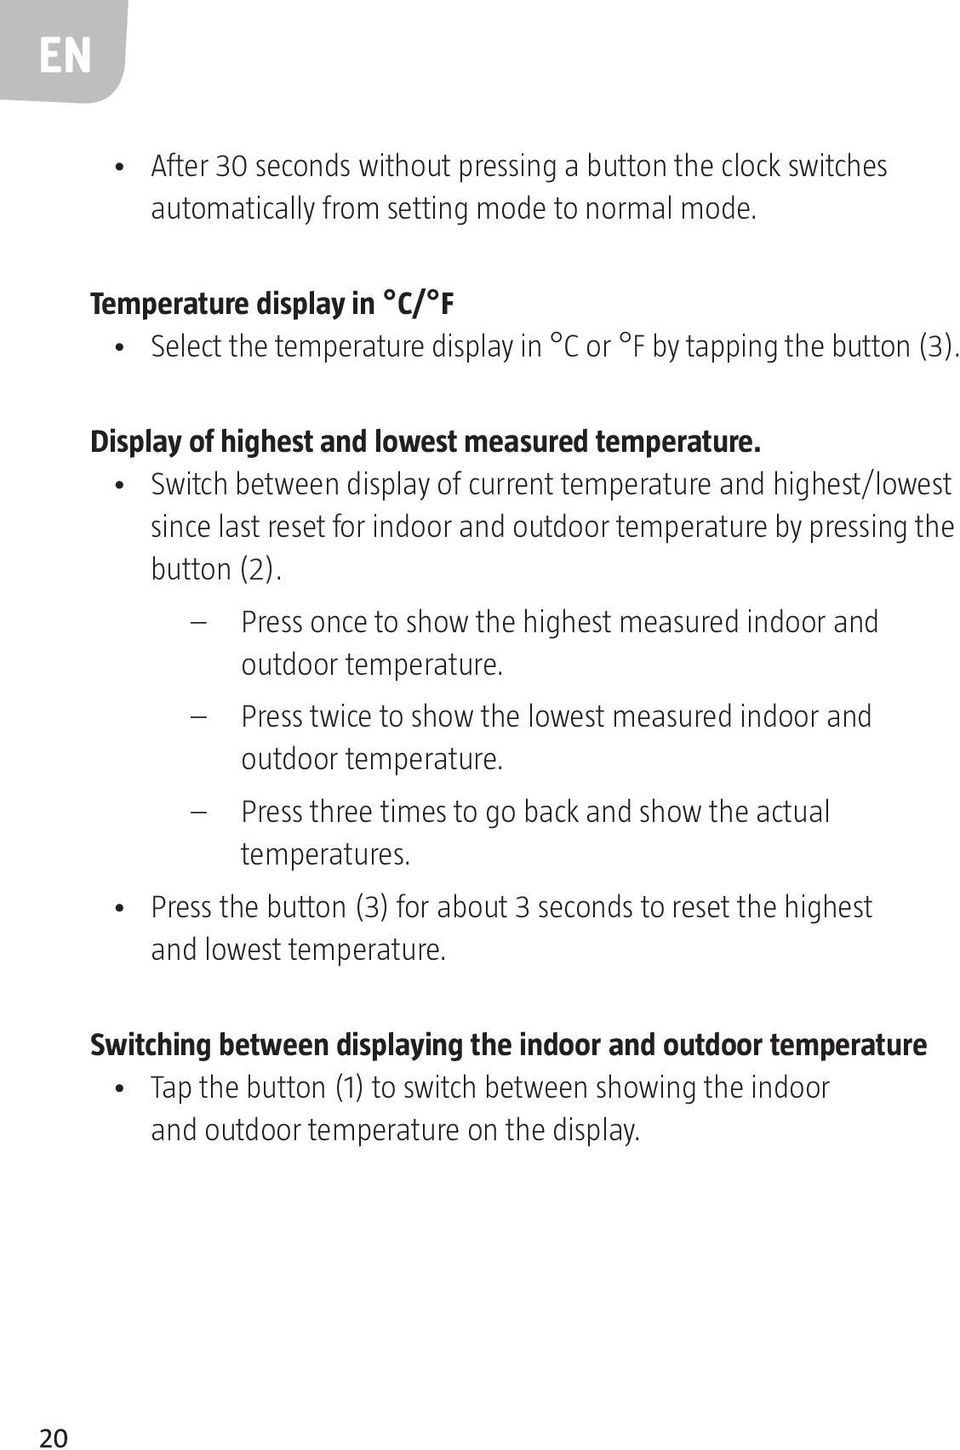 Switch between display of current temperature and highest/lowest since last reset for indoor and outdoor temperature by pressing the button (2).